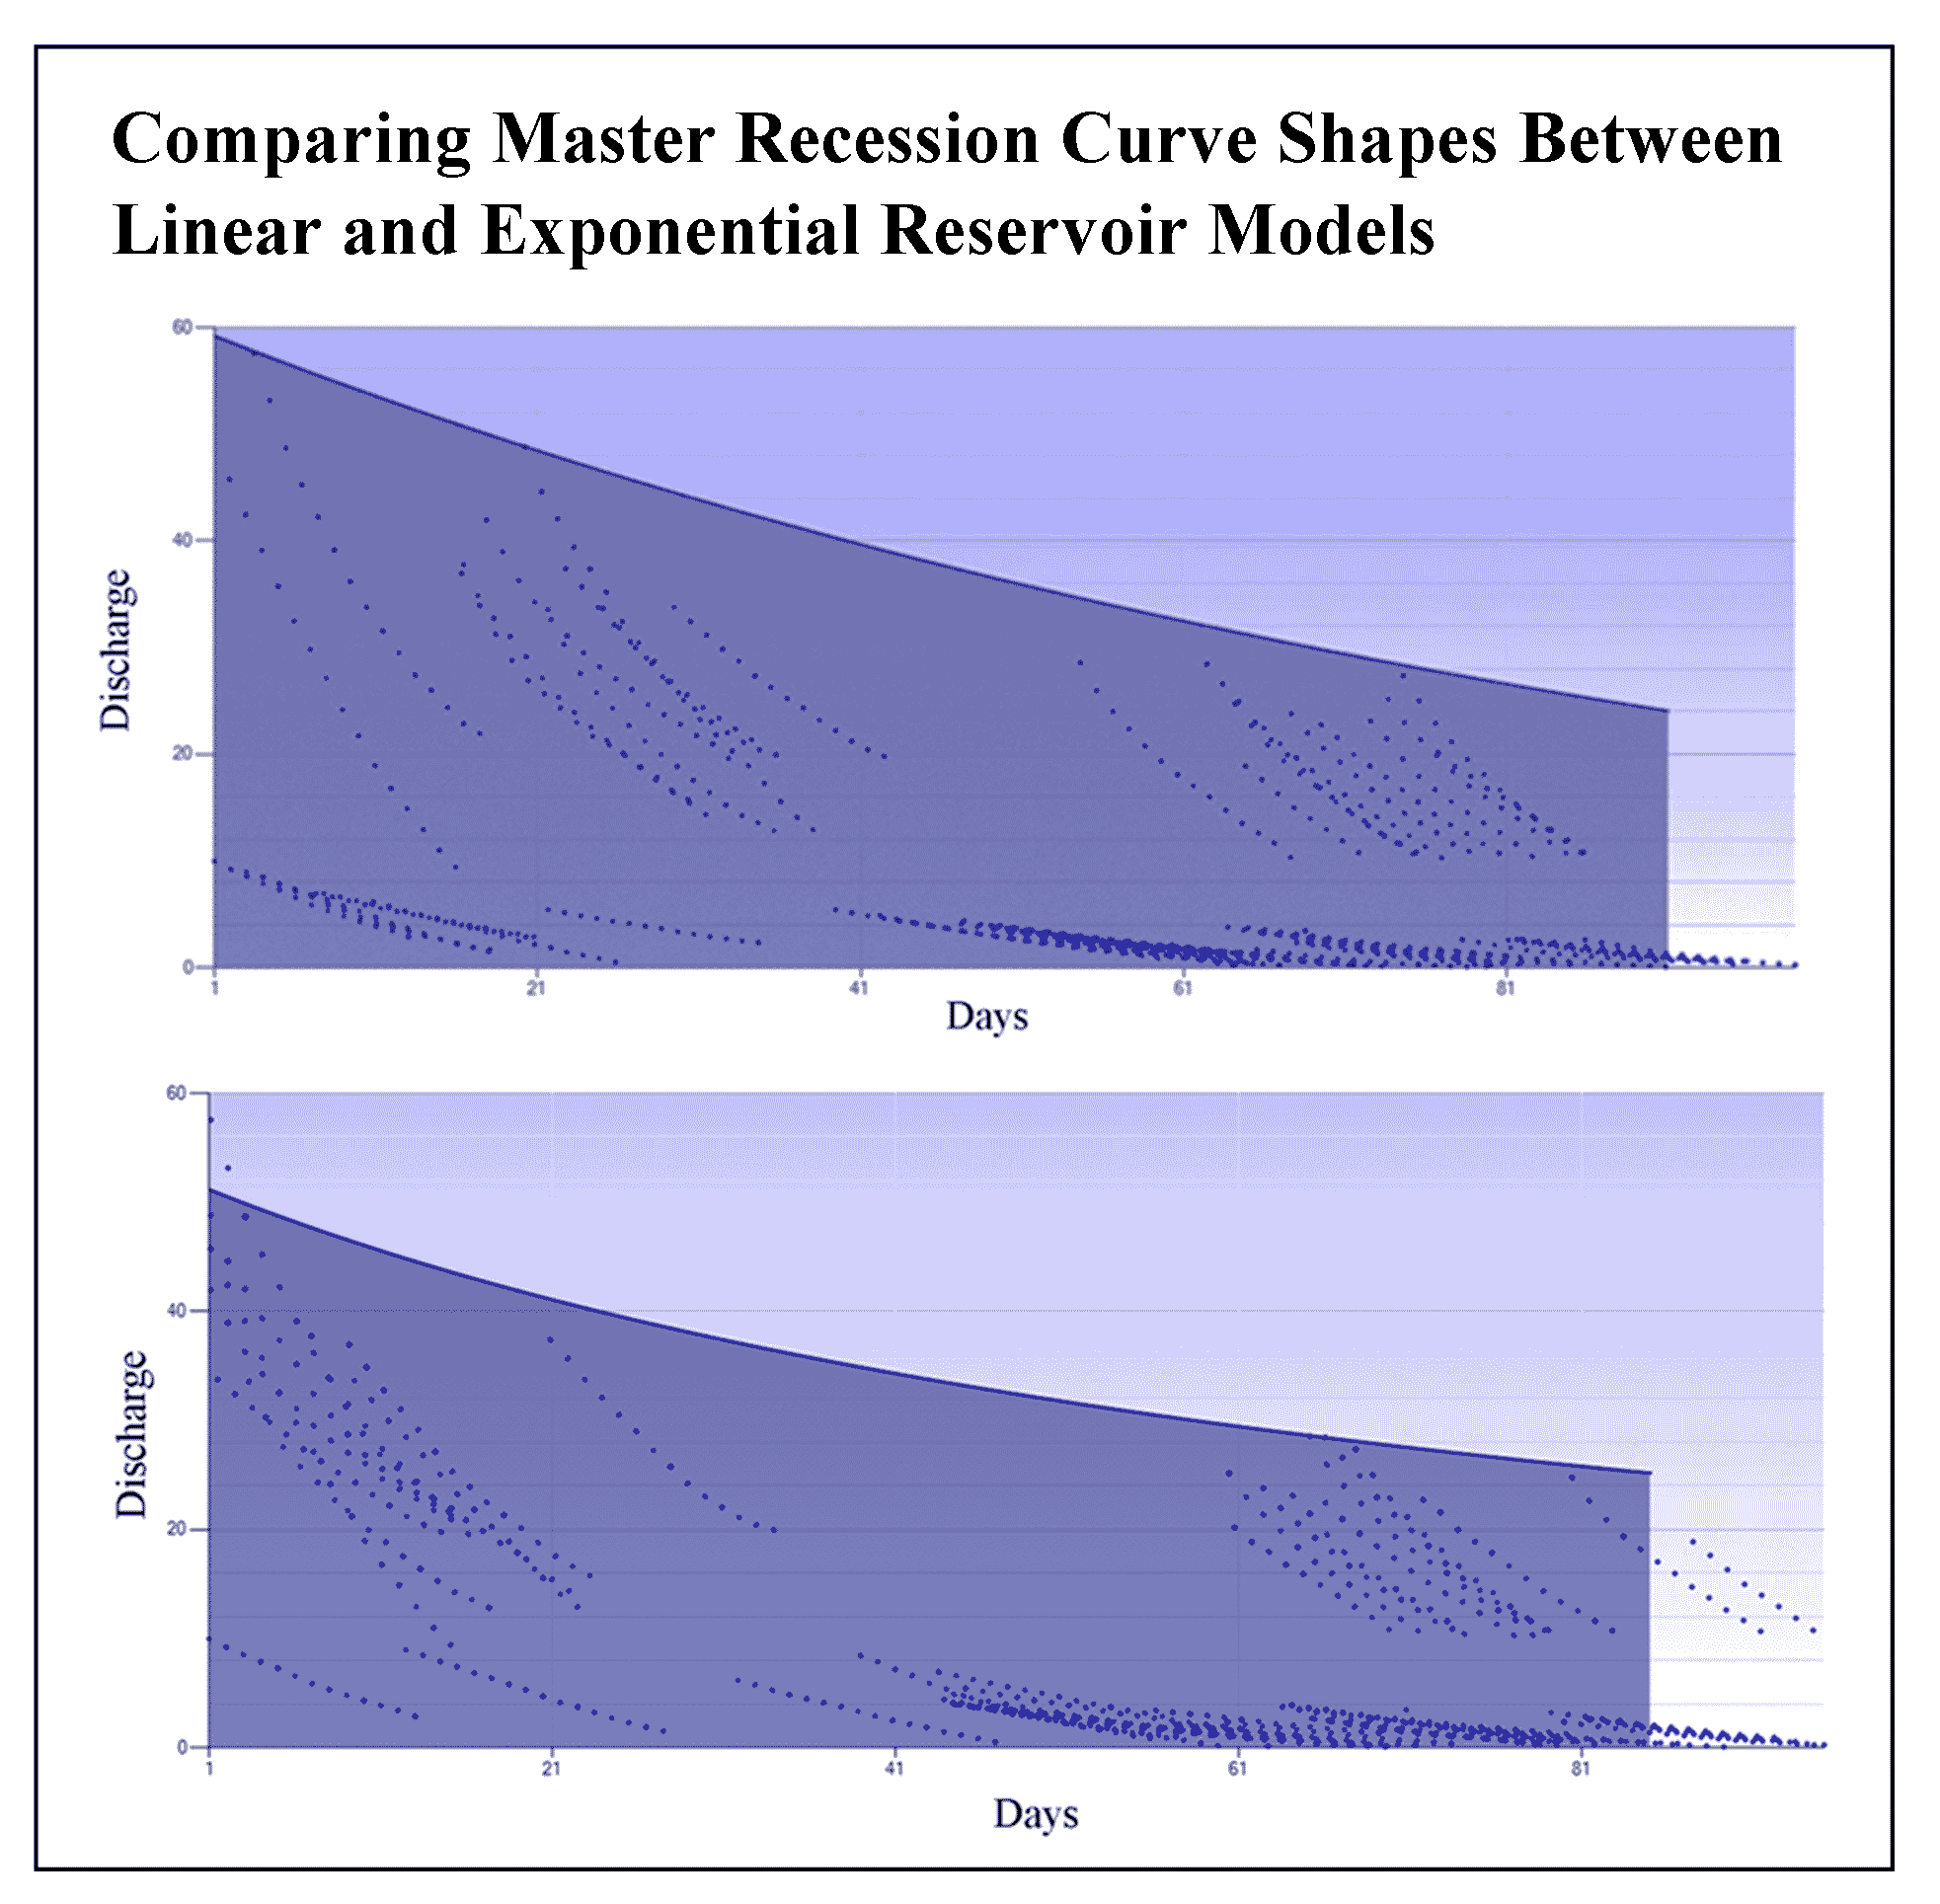 Comparing Master Recession Curve Shapes Between Linear and Exponential Reservoir Models